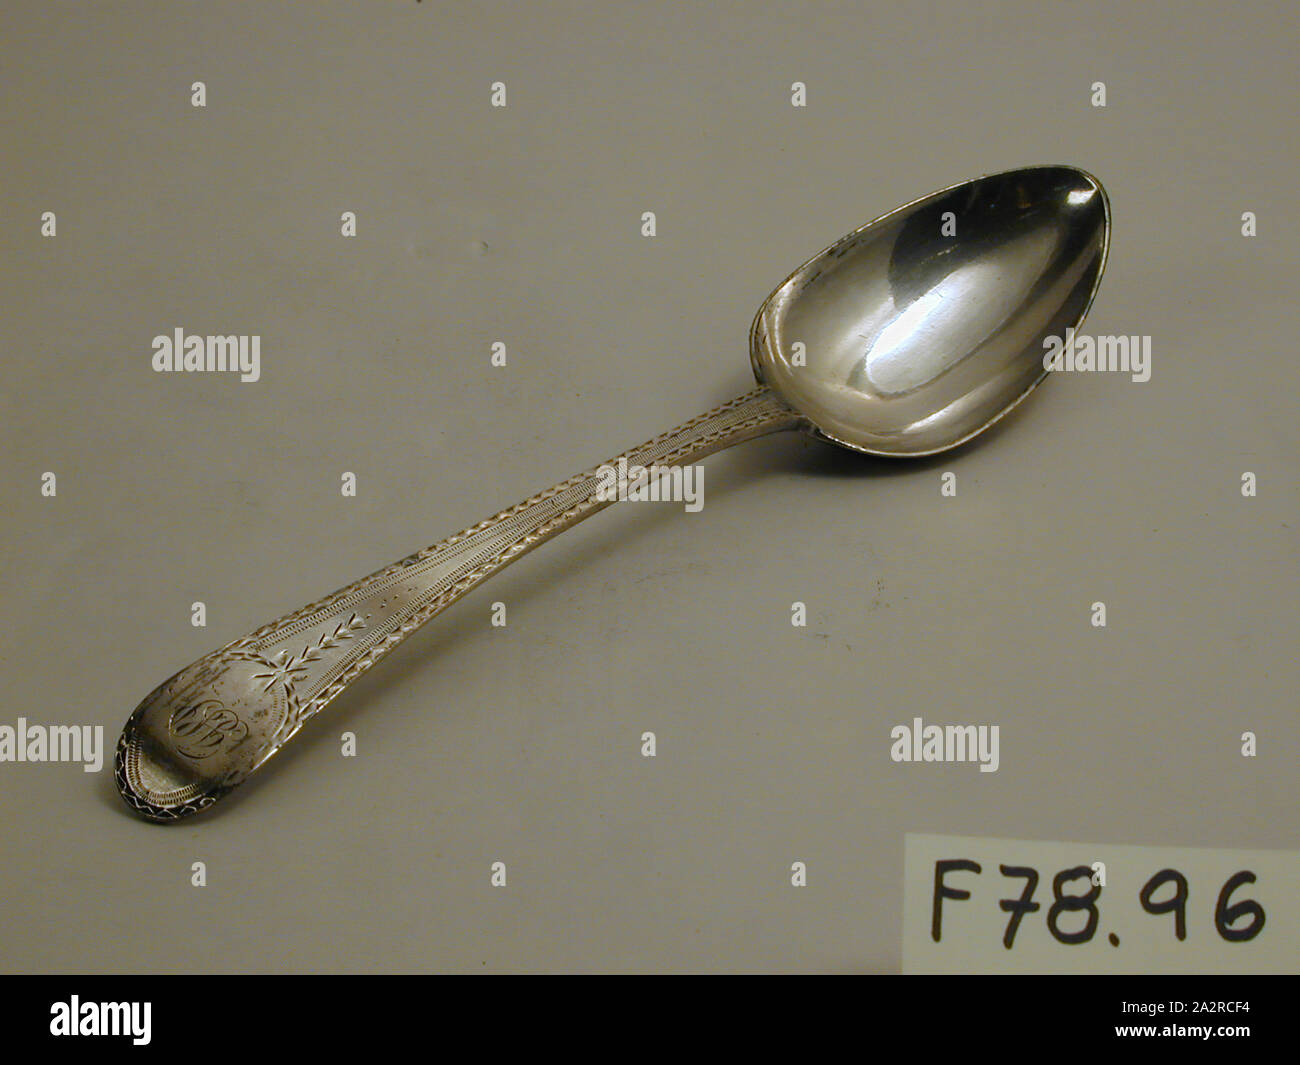 https://c8.alamy.com/comp/2A2RCF4/george-iii-tablespoon-1788-silver-overall-8-58-1-34-1-14-inches-219-44-32-cm-2A2RCF4.jpg